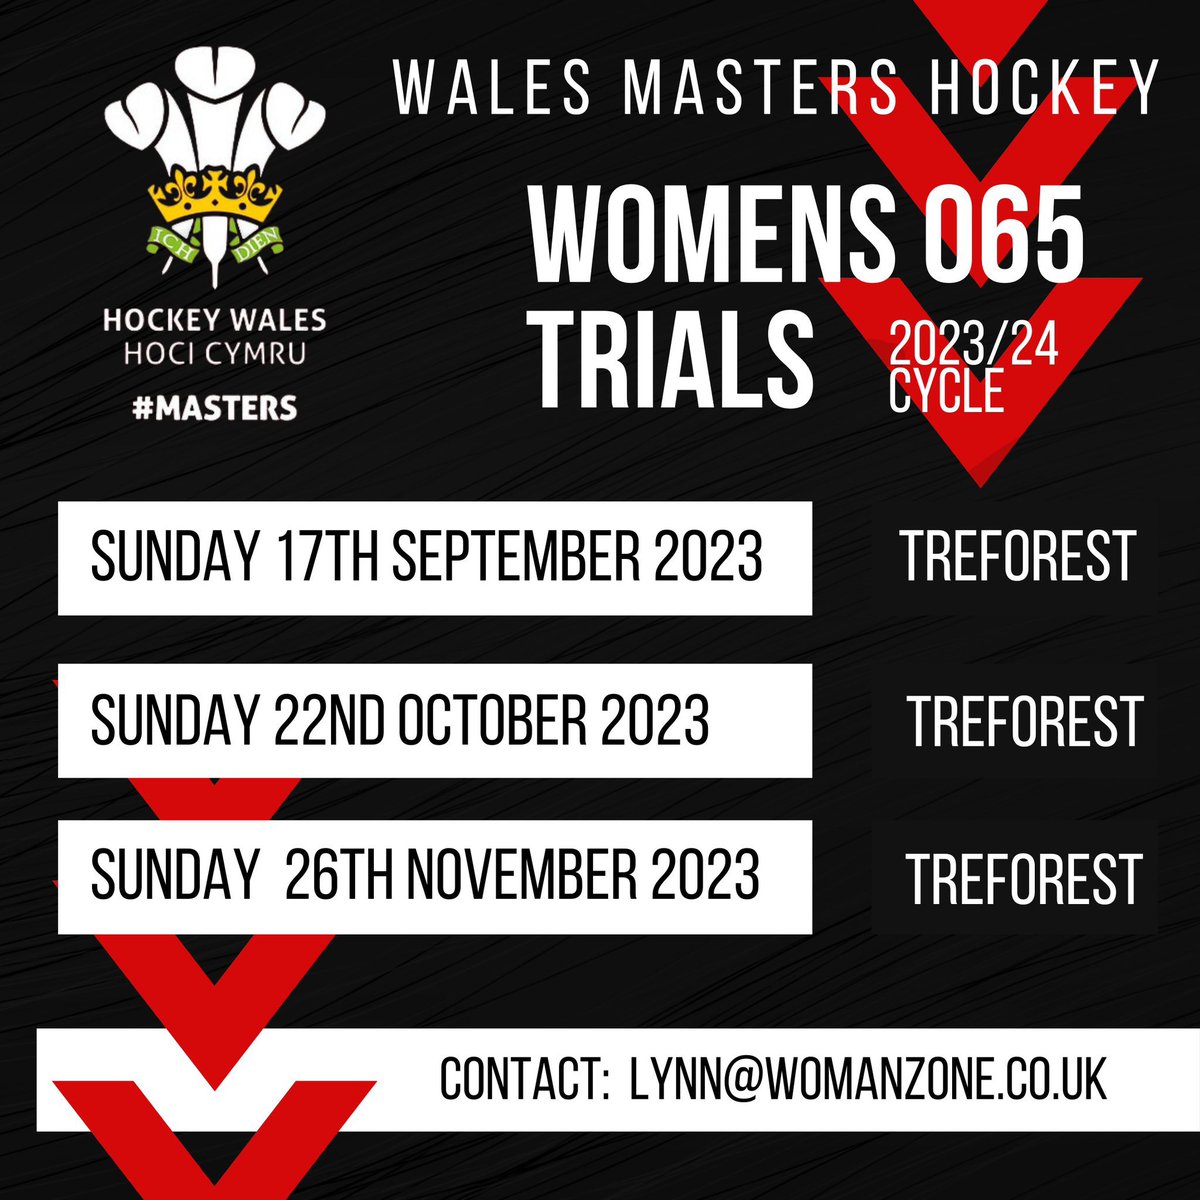 Really looking forward to the next cycle for the @WalesLadiesHock 65s Looking to build on the 🥉 that we won at the European Competition. Trials & prep work for 2024 Home Nations 🏴󠁧󠁢󠁥󠁮󠁧󠁿 & World Cup 🇳🇿 #bringiton 💪🏼 #nevertooold #comeandhaveago #WALES #Masters #wearestillstanding